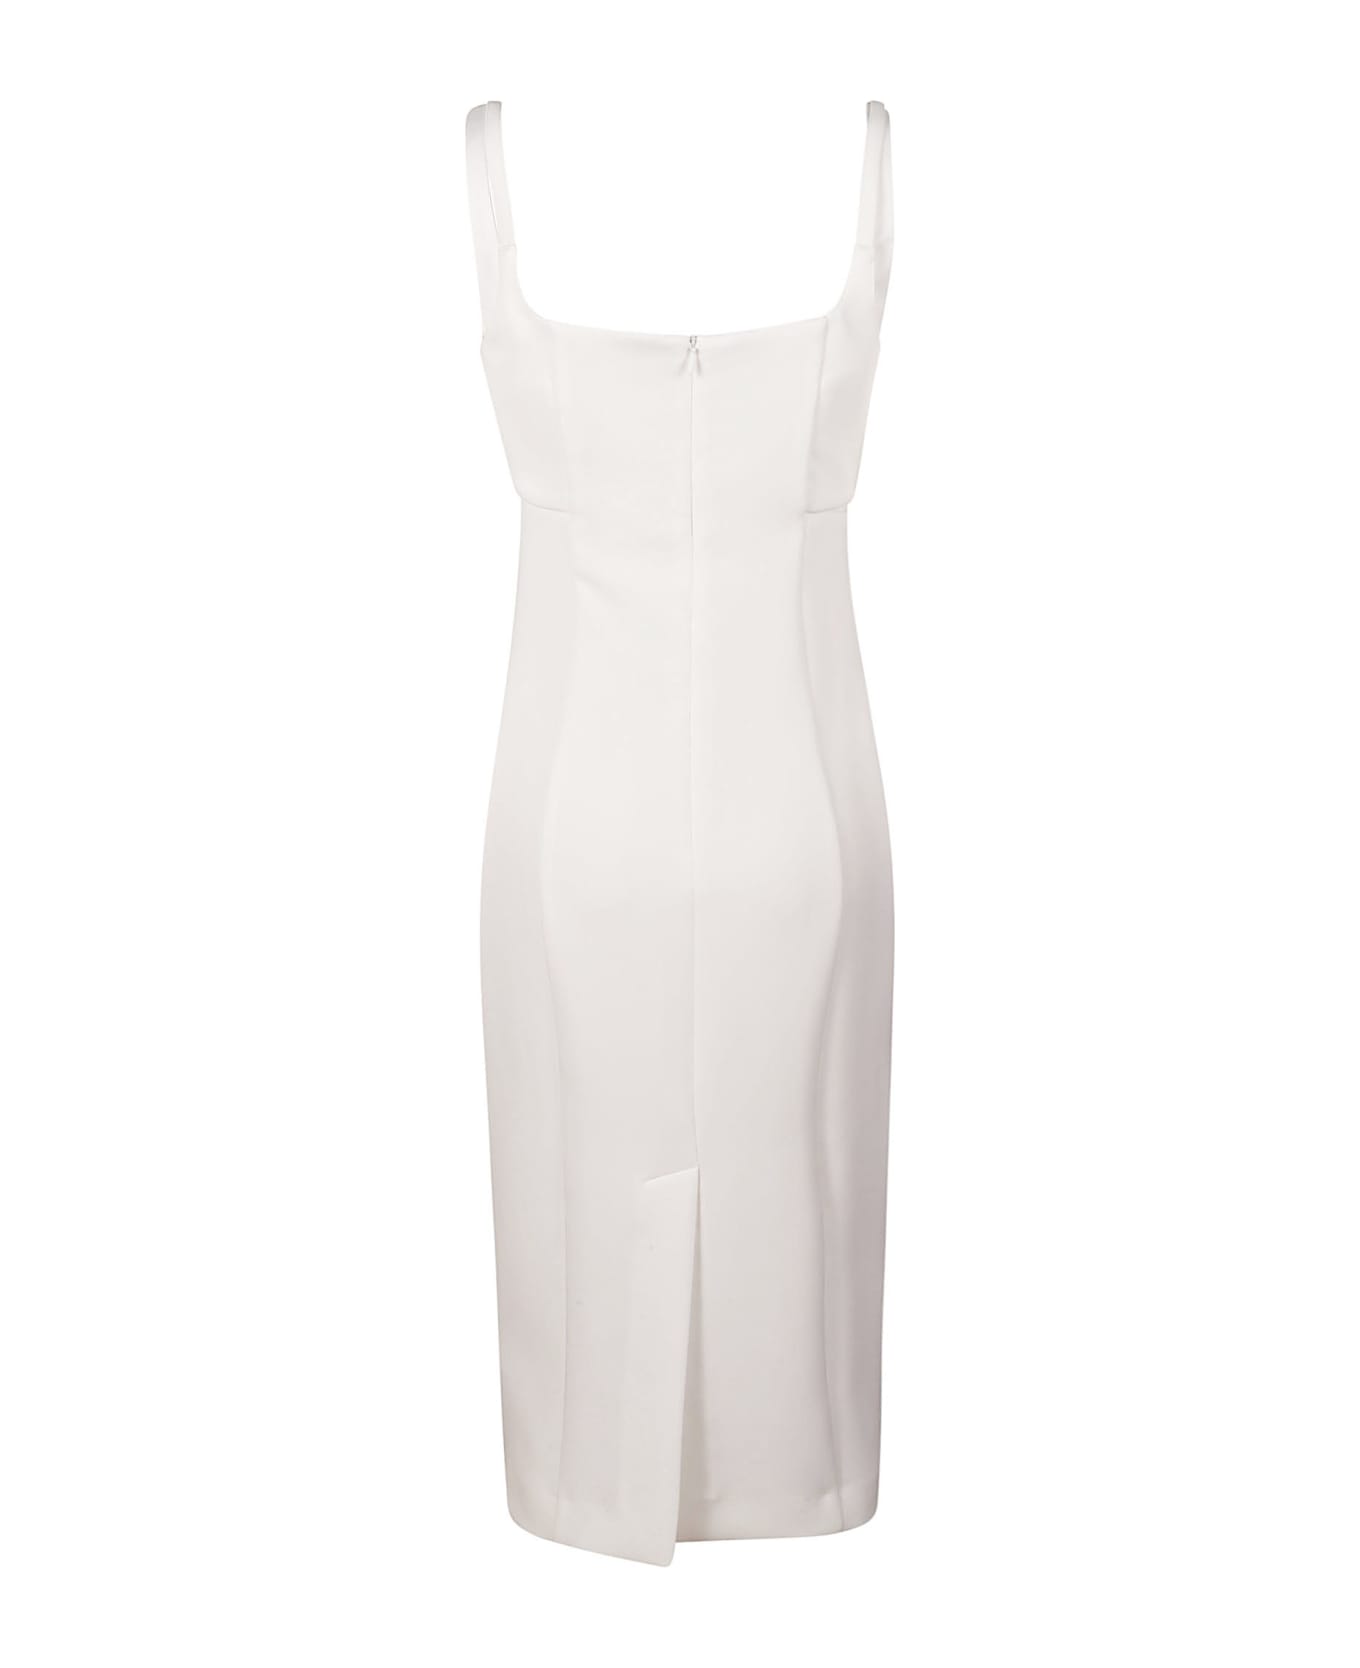 Versace Jeans Couture Cady Bistretch Rear Zip Dress - White